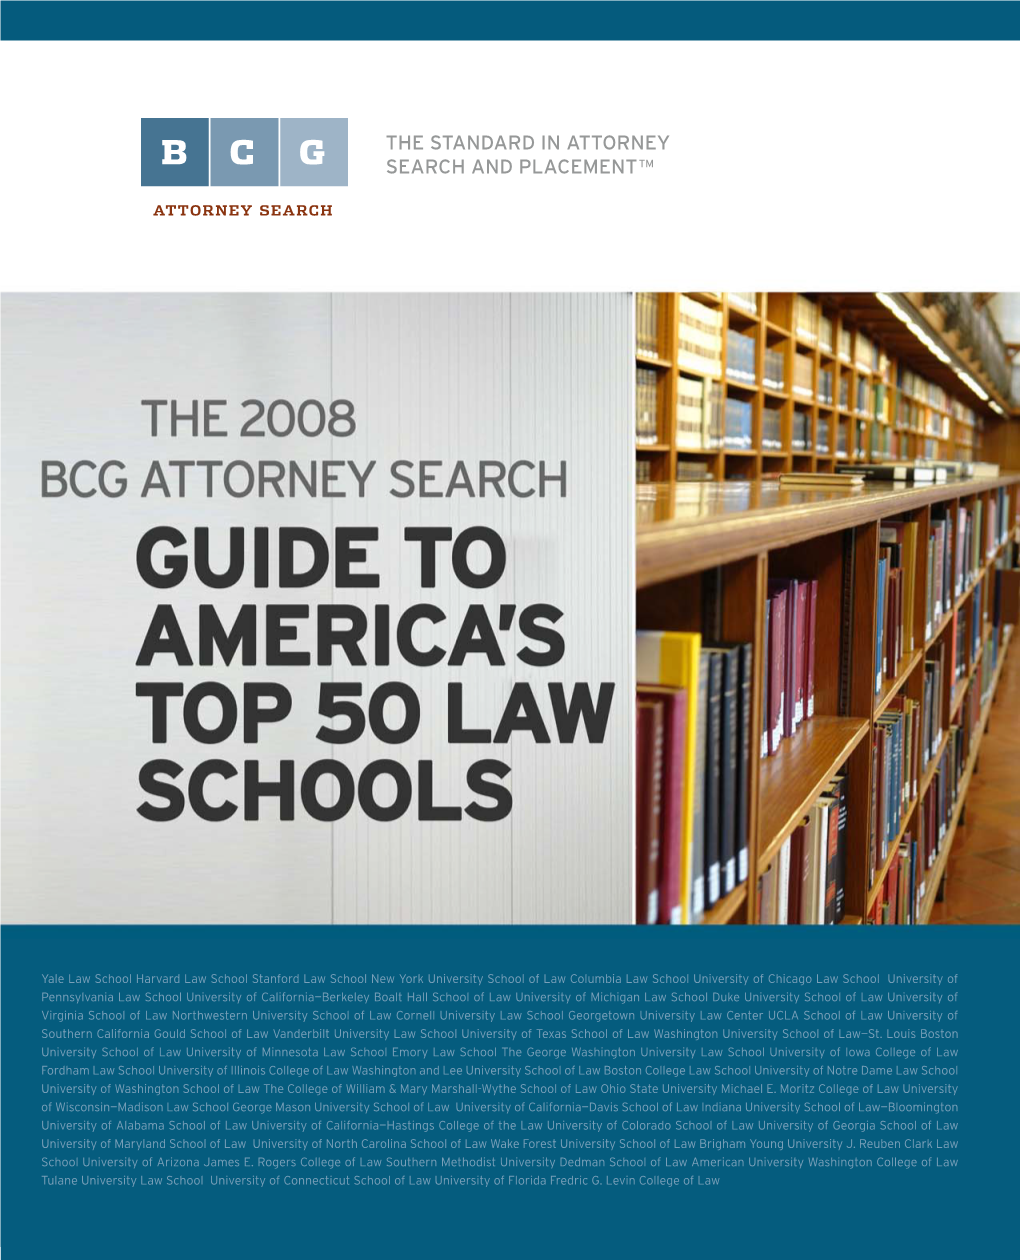 The 2008 BCG Attorney Search Guide to America's Top 50 Law Schools